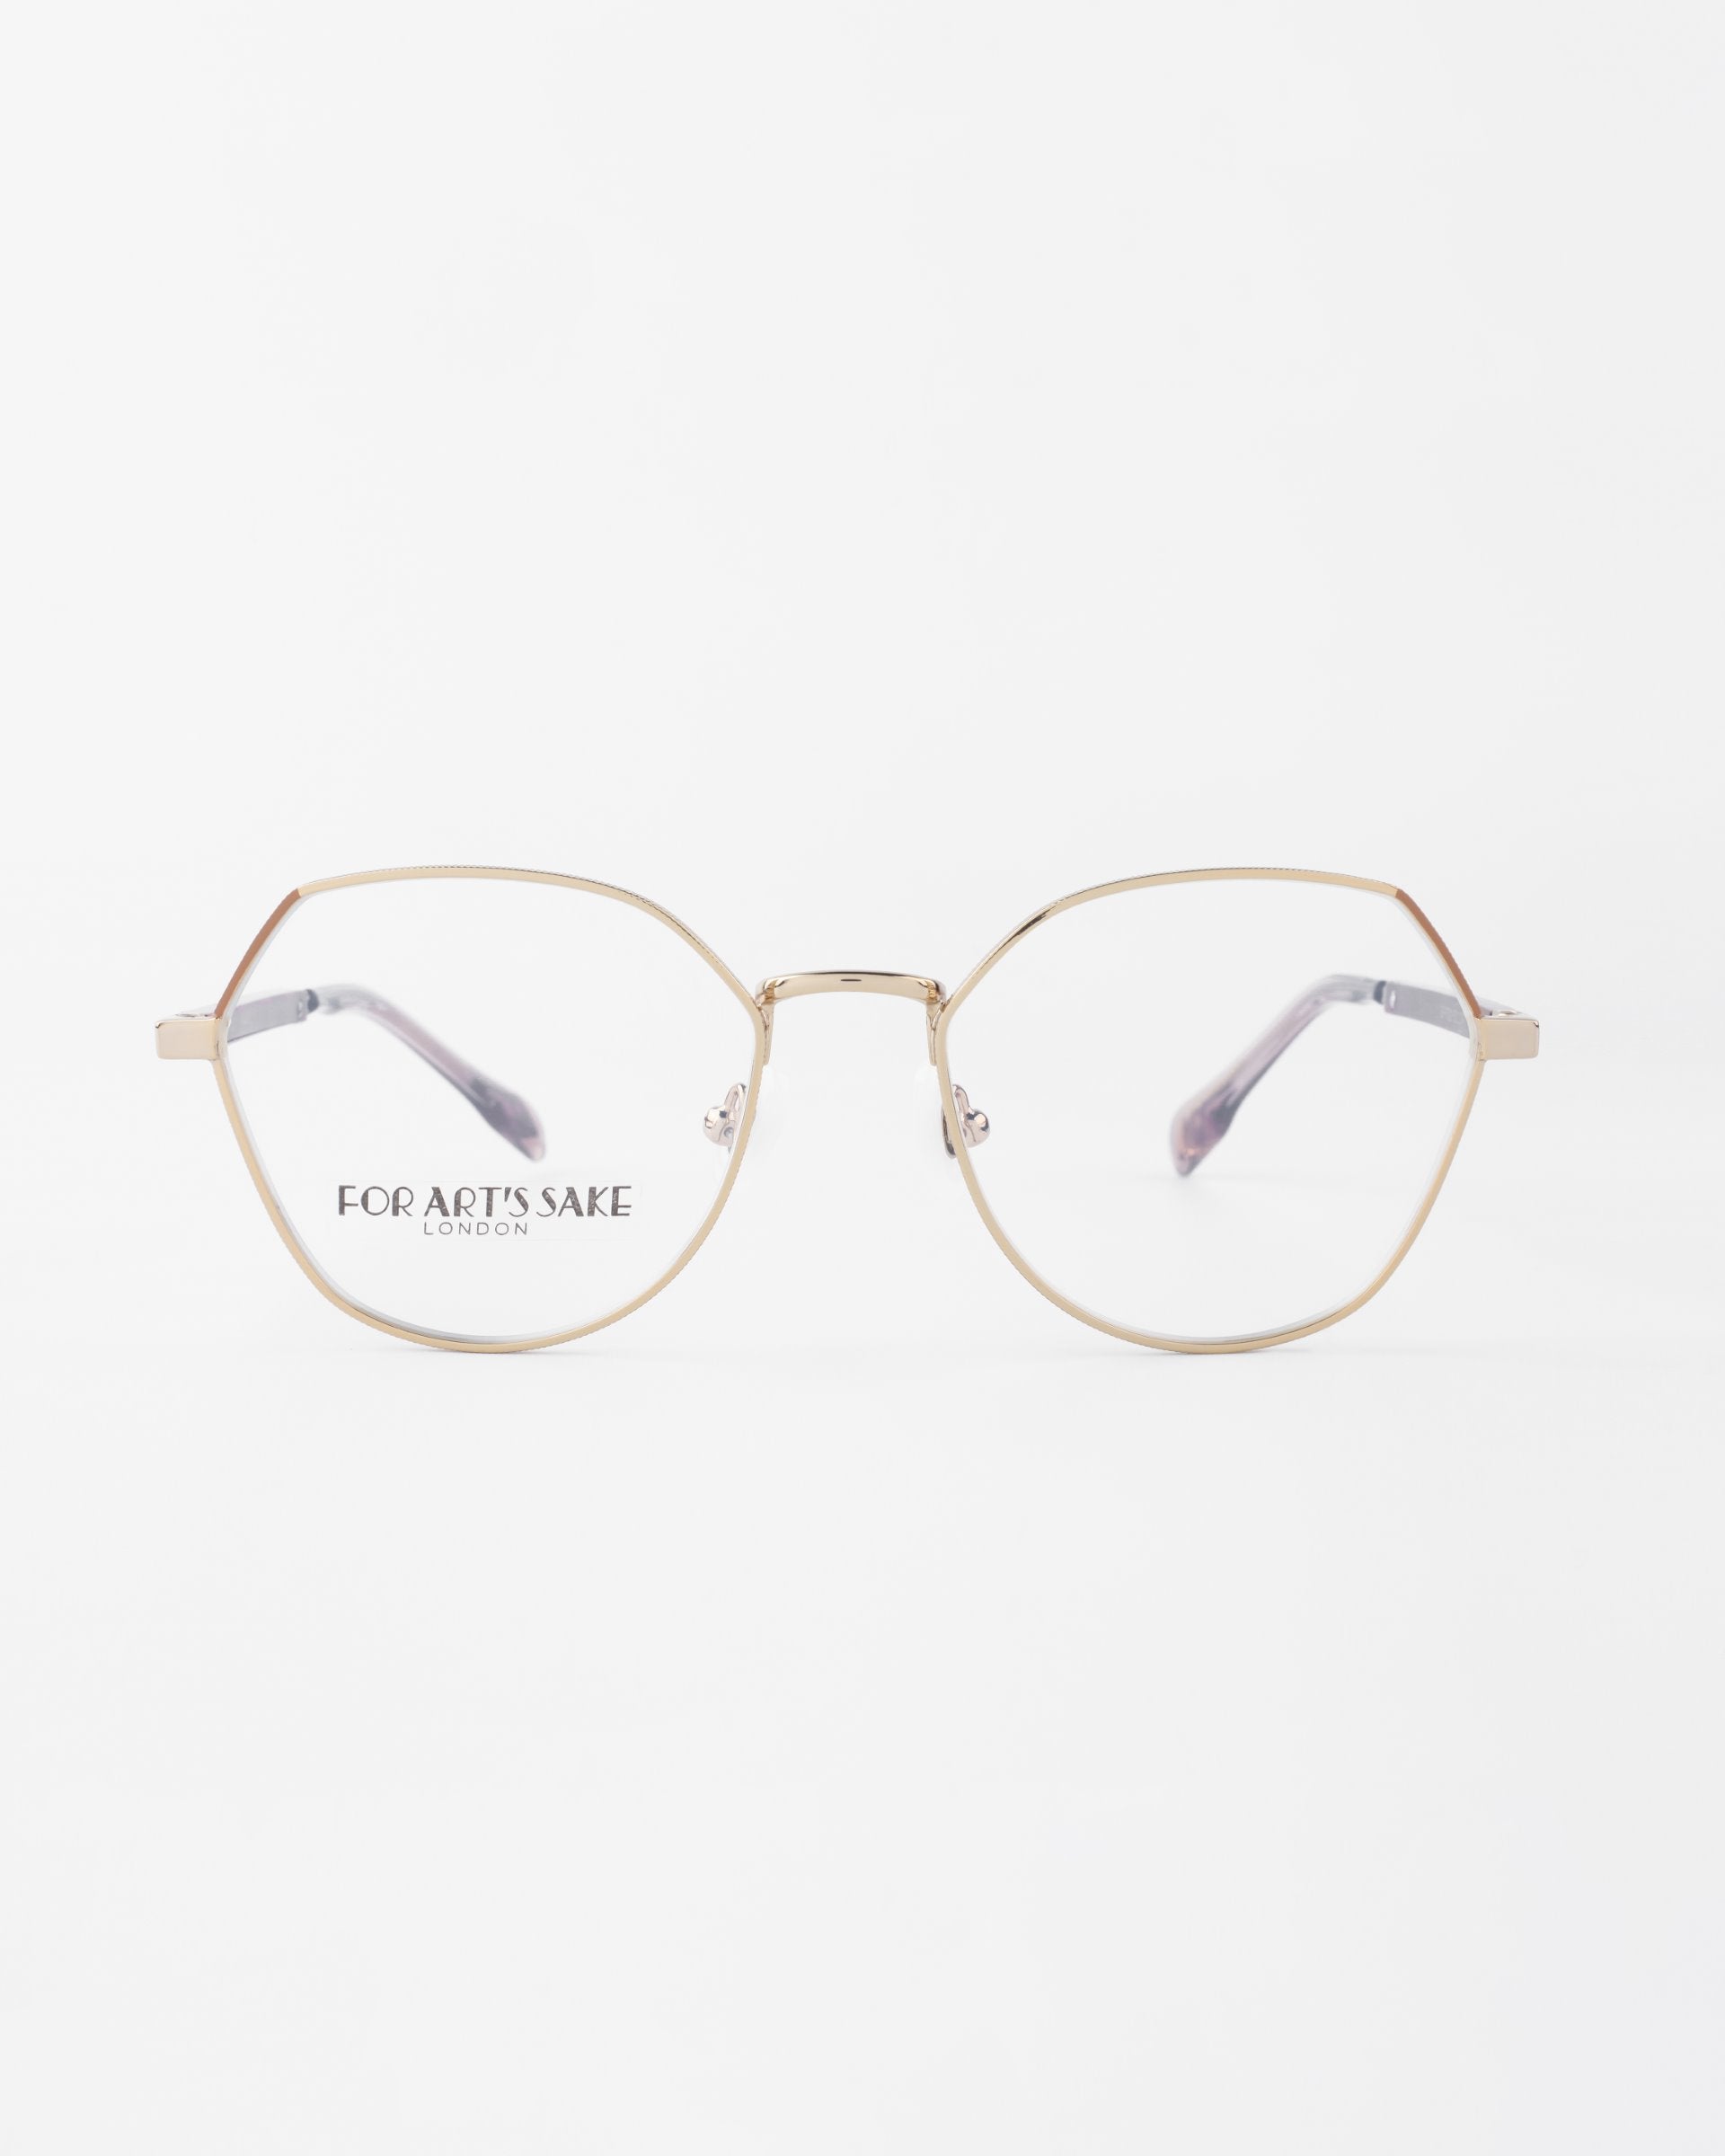 A pair of Orchard eyeglasses with a thin, 18-karat gold-plated frame and round, clear lenses. The brand name &quot;For Art&#39;s Sake®&quot; is visible on the left lens. The background is plain white, emphasizing the delicate design of these elegant glasses, which also feature optional prescription lenses.